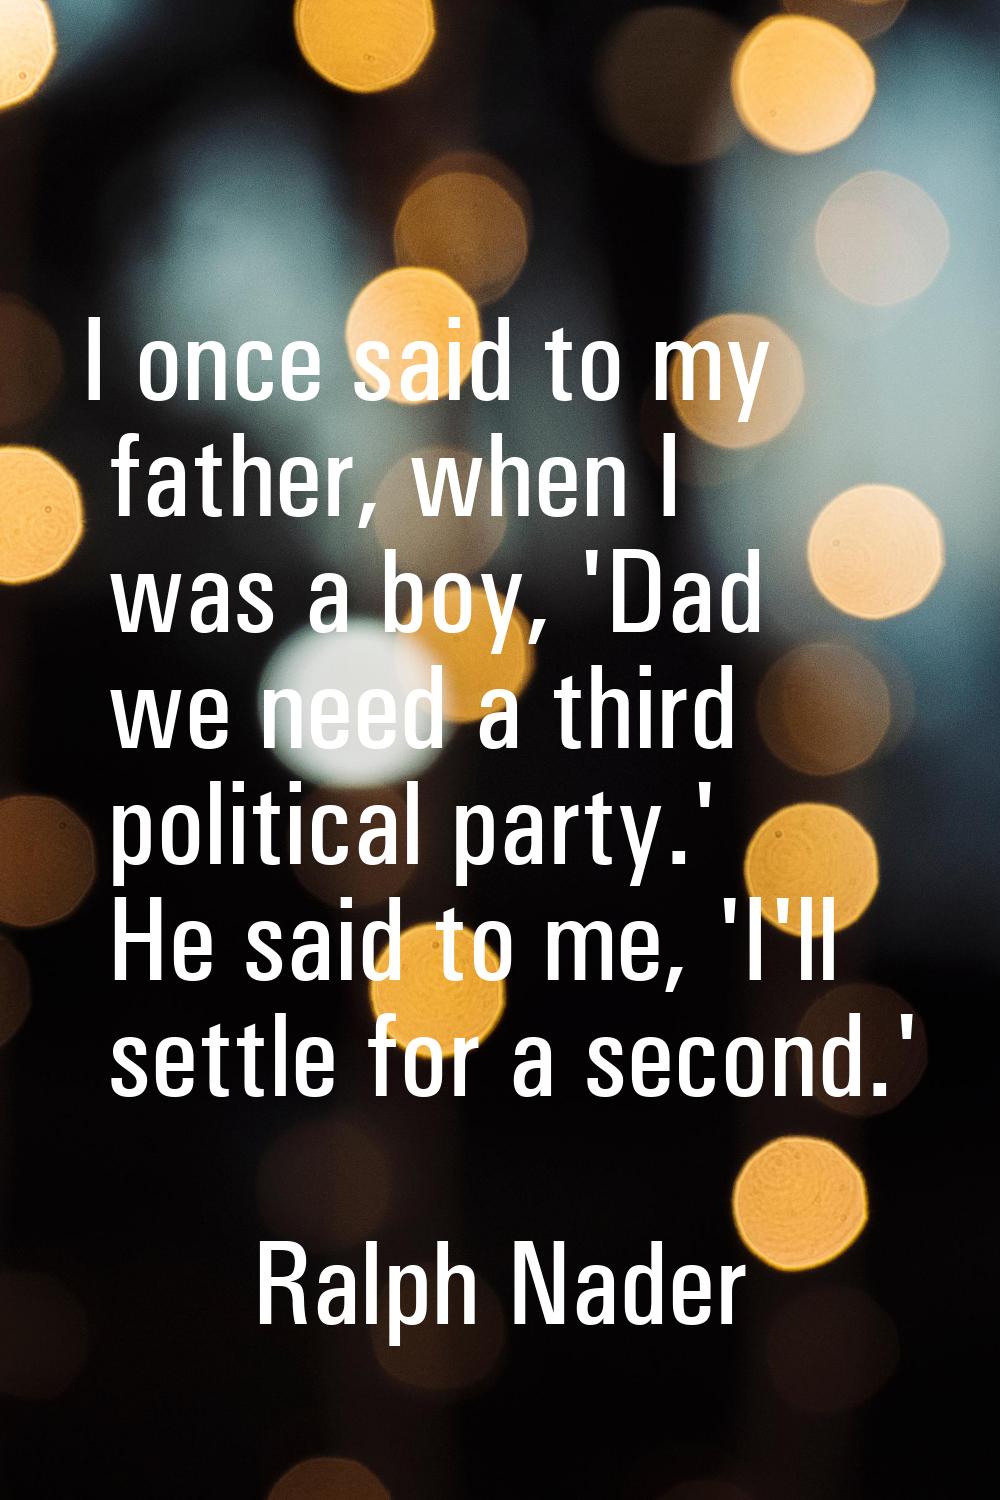 I once said to my father, when I was a boy, 'Dad we need a third political party.' He said to me, '